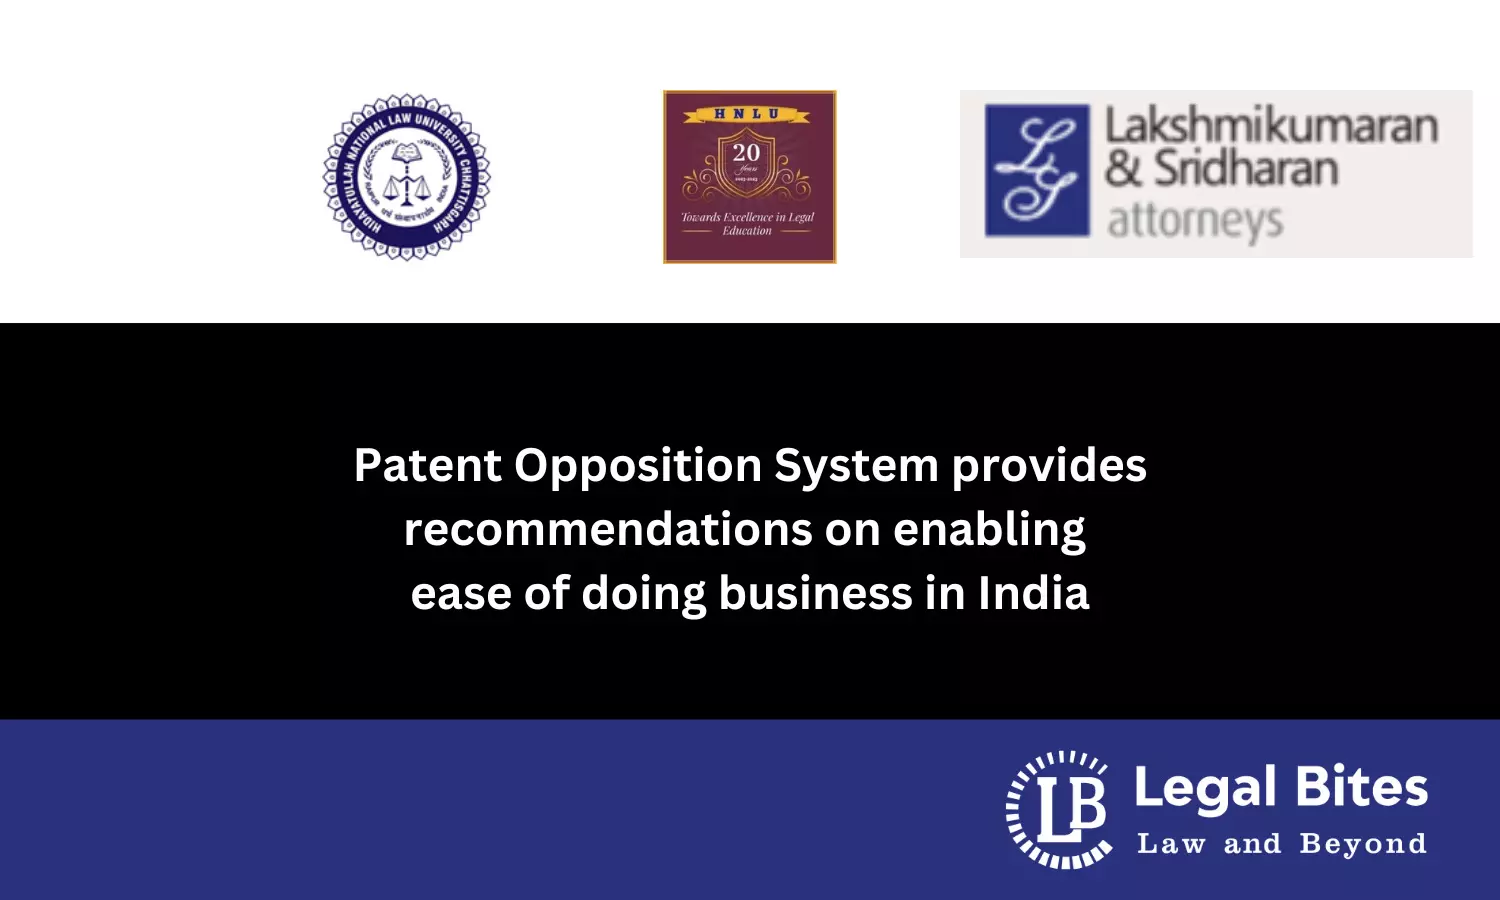 Report on Patent Opposition System provides recommendations on enabling ease of doing business in India